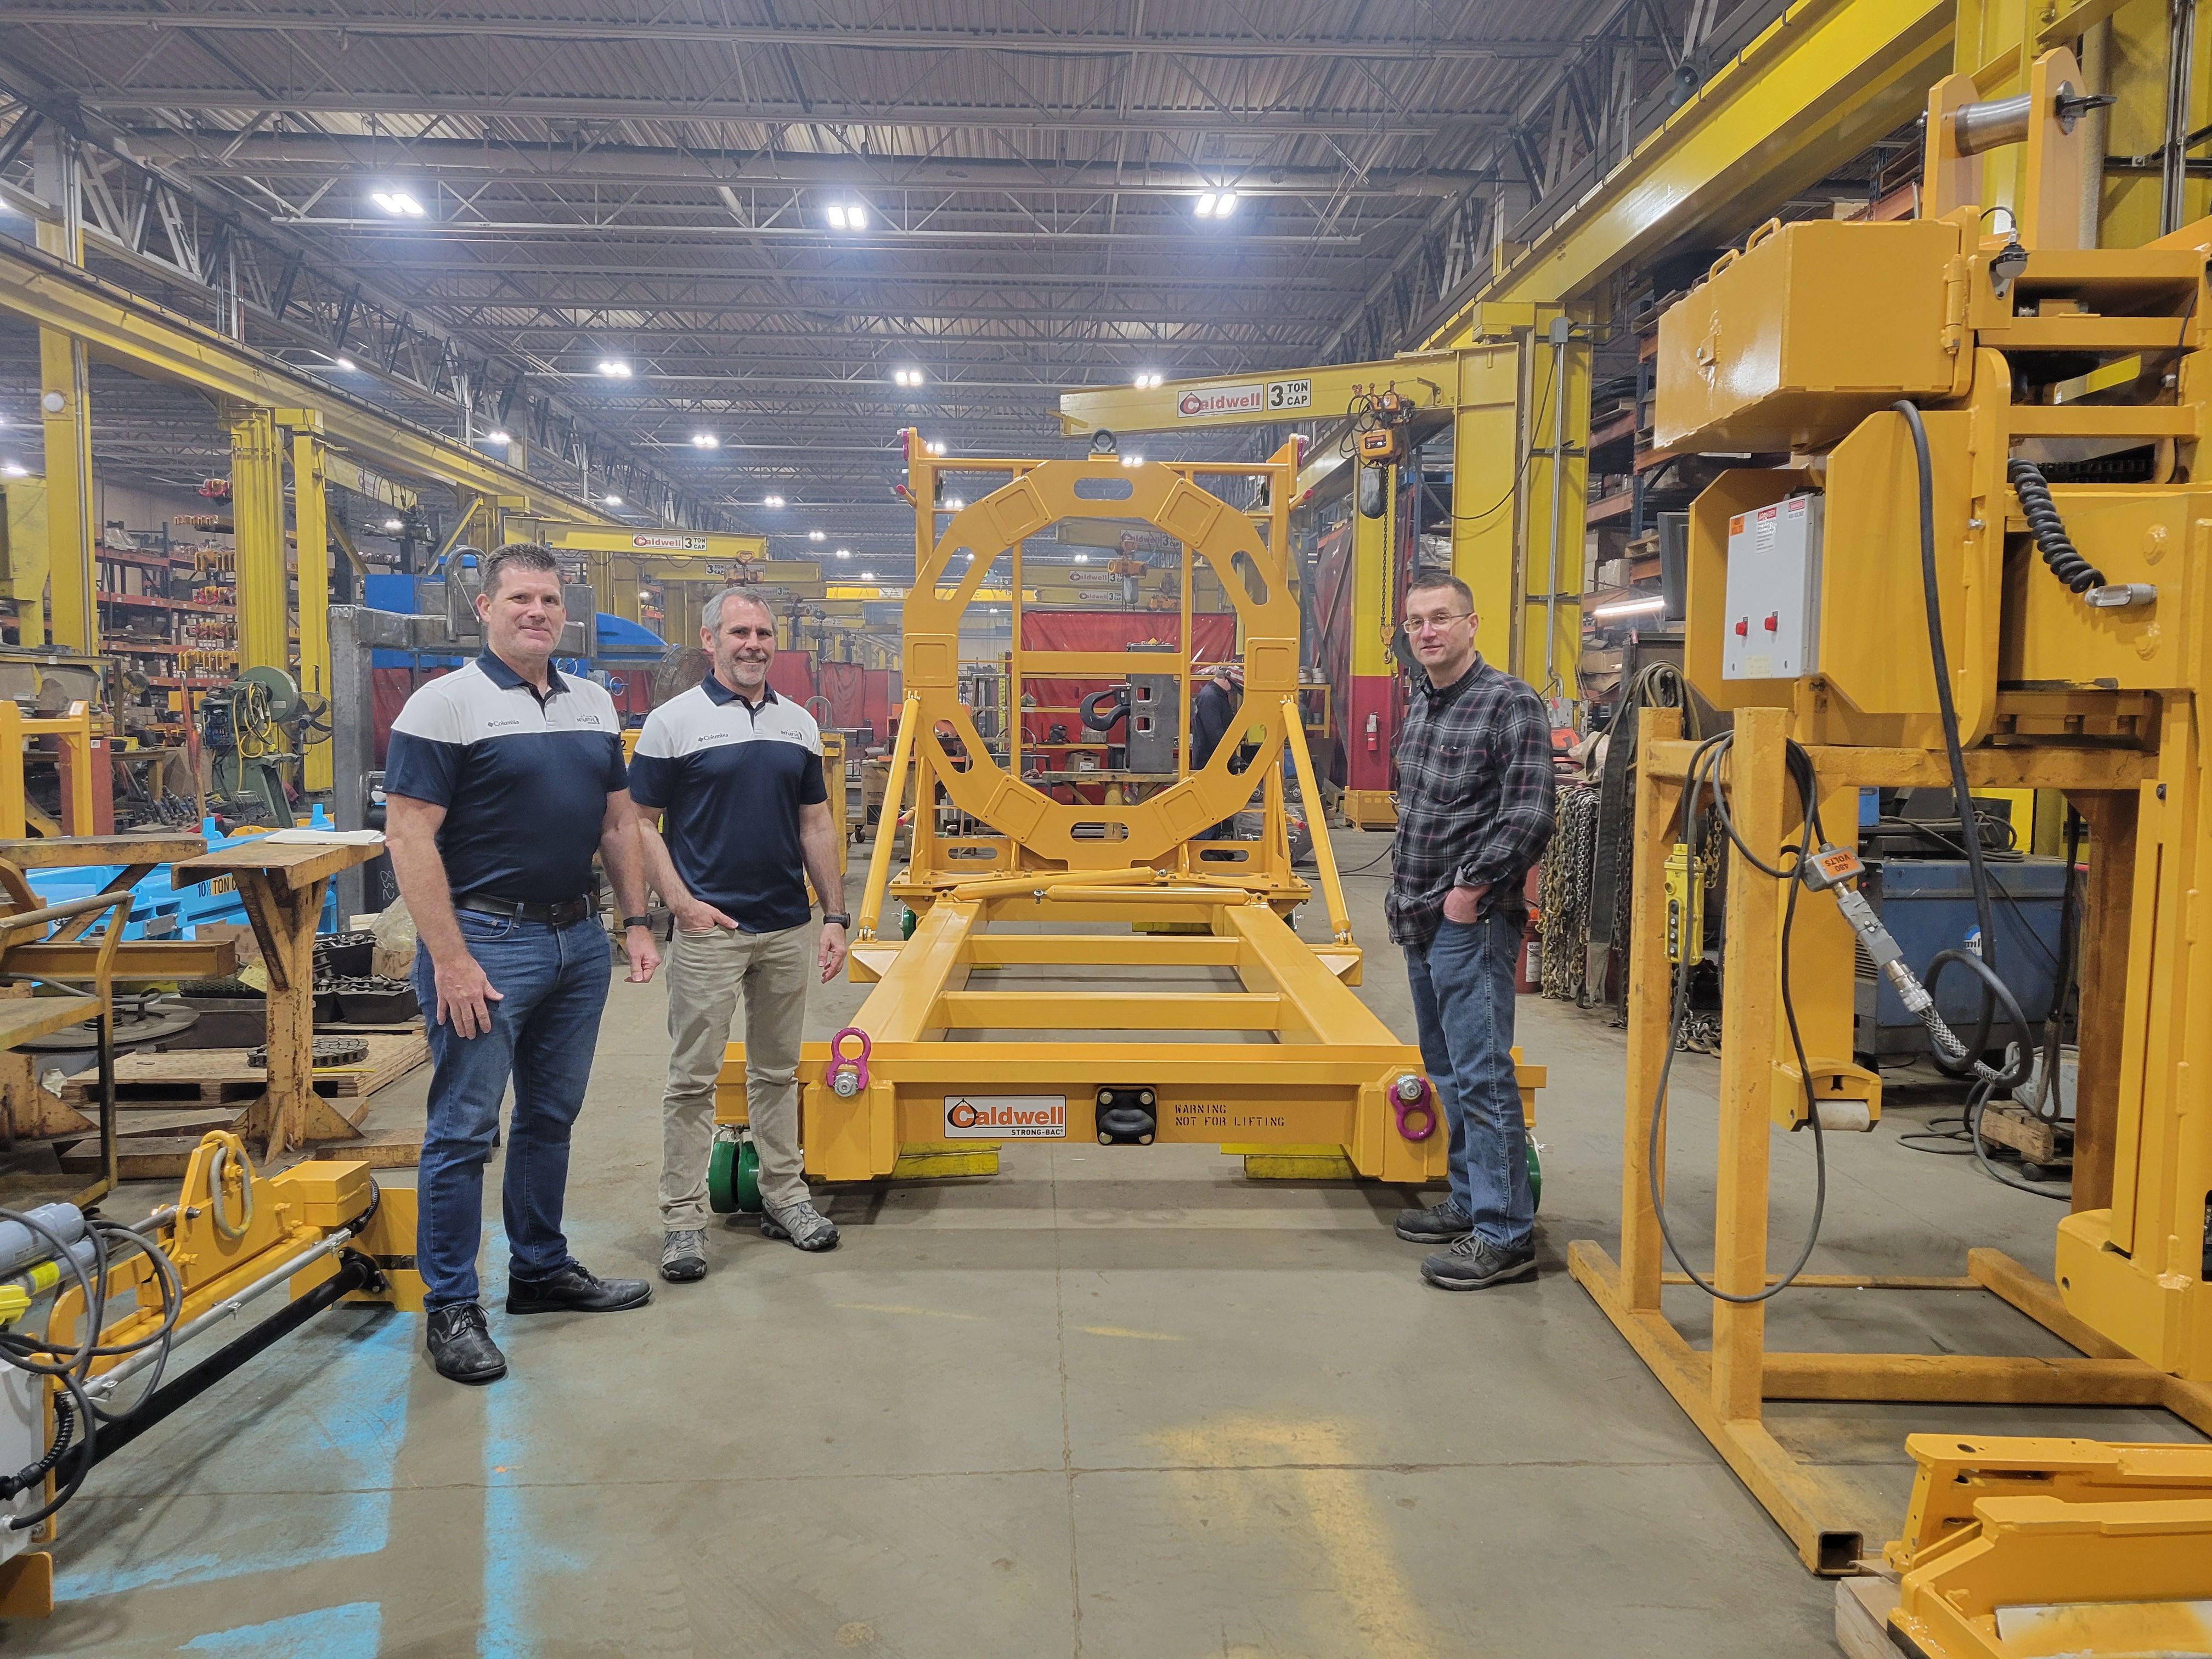 Left to right: Brian Johnson, senior mechanical design lead, CSWPA at Iron Ring Technologies; Greg Vajdos, integrated test and verification lead at Intuitive Machines; and Dan Mongan, senior sales engineer / project leader at Caldwell.